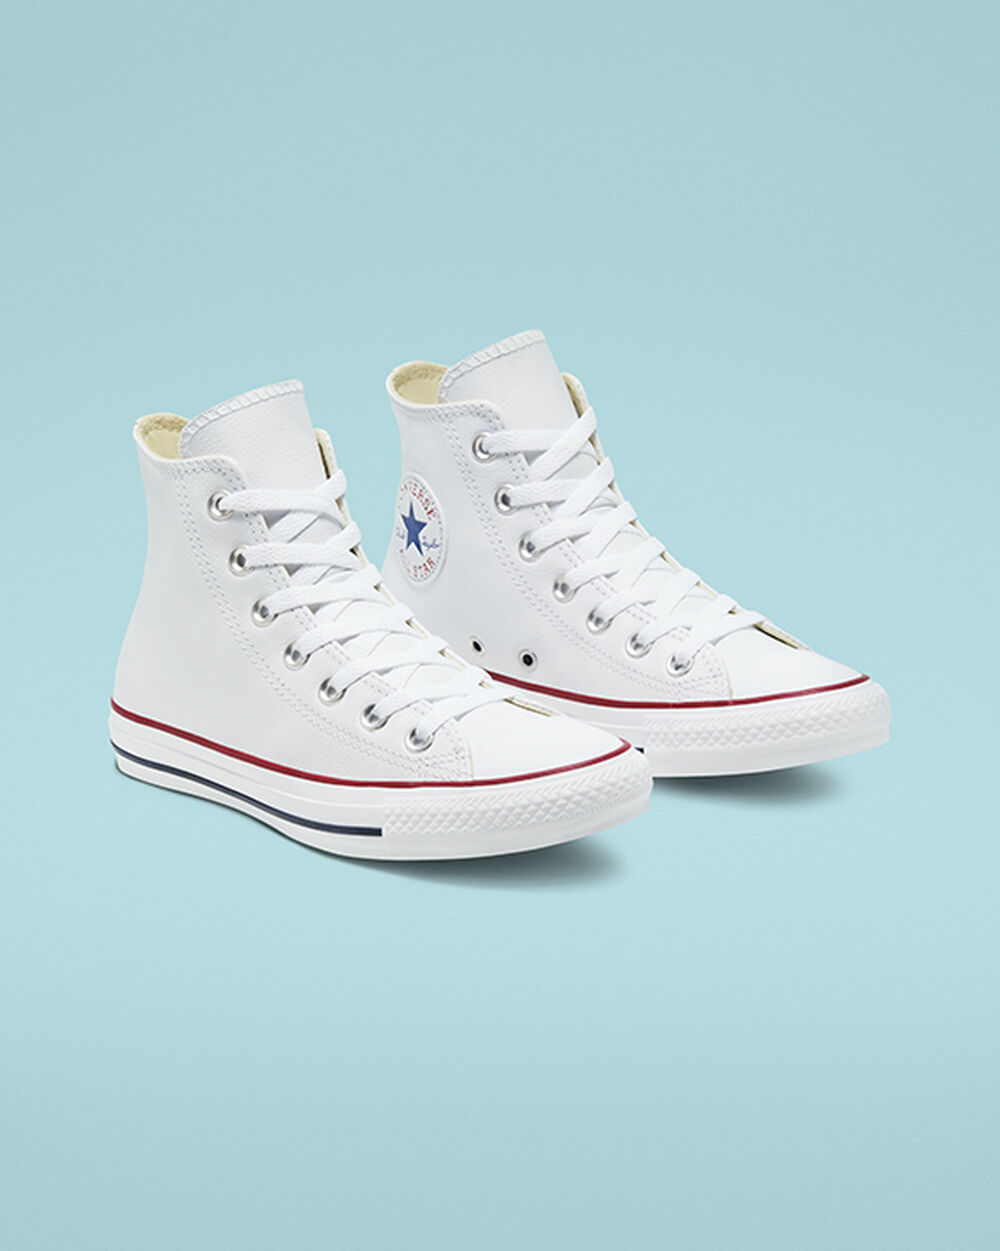 Tenis Converse Chuck Taylor All Star Mujer Blancos | Mexico-536476